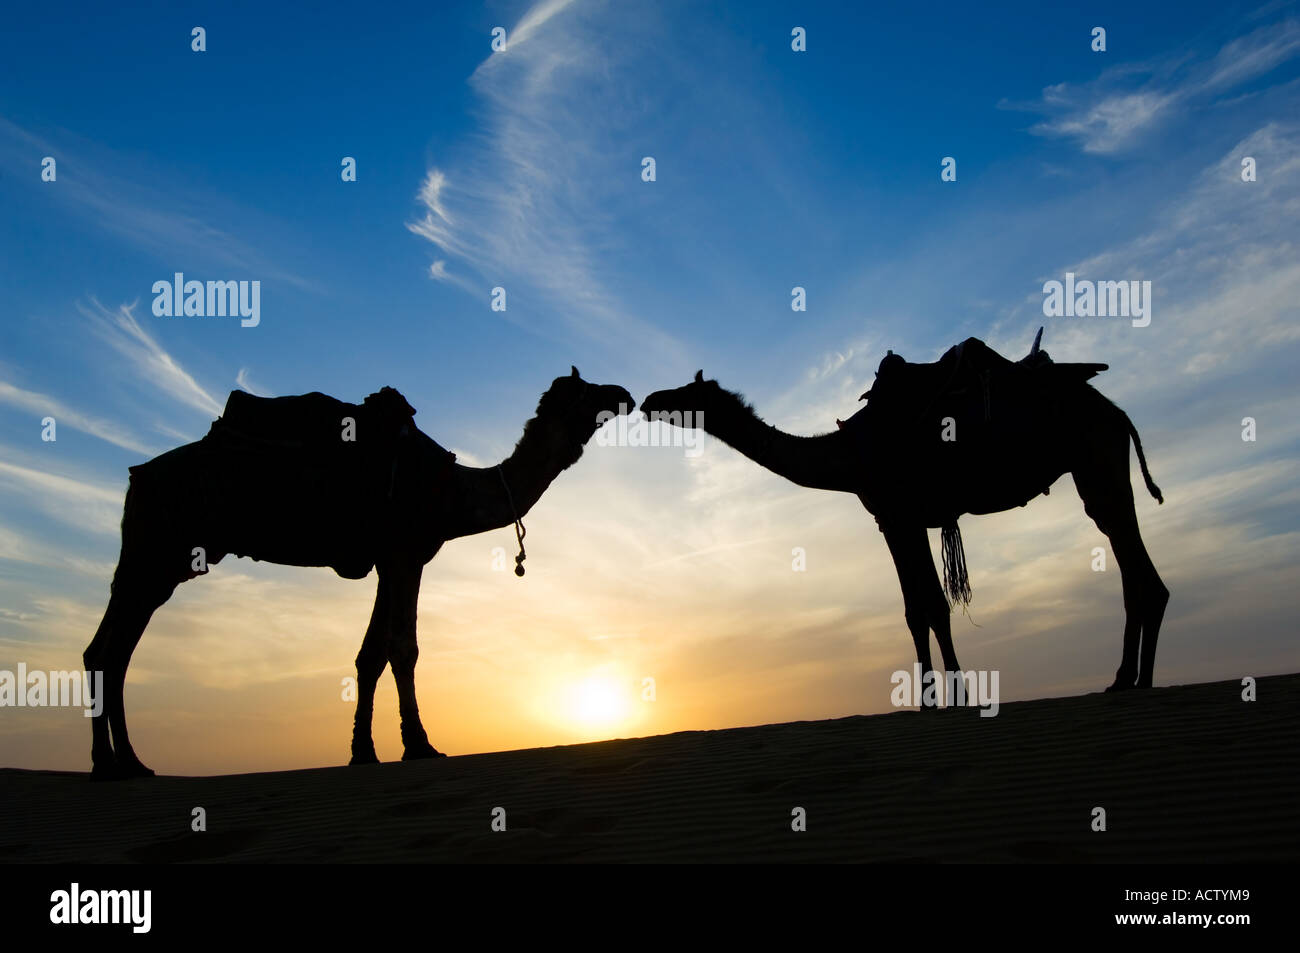 Two Jaisalmeri camels (Camelus dromedarius) 'in love' kissing and silhouetted by the setting sun in the Thar desert. Stock Photo